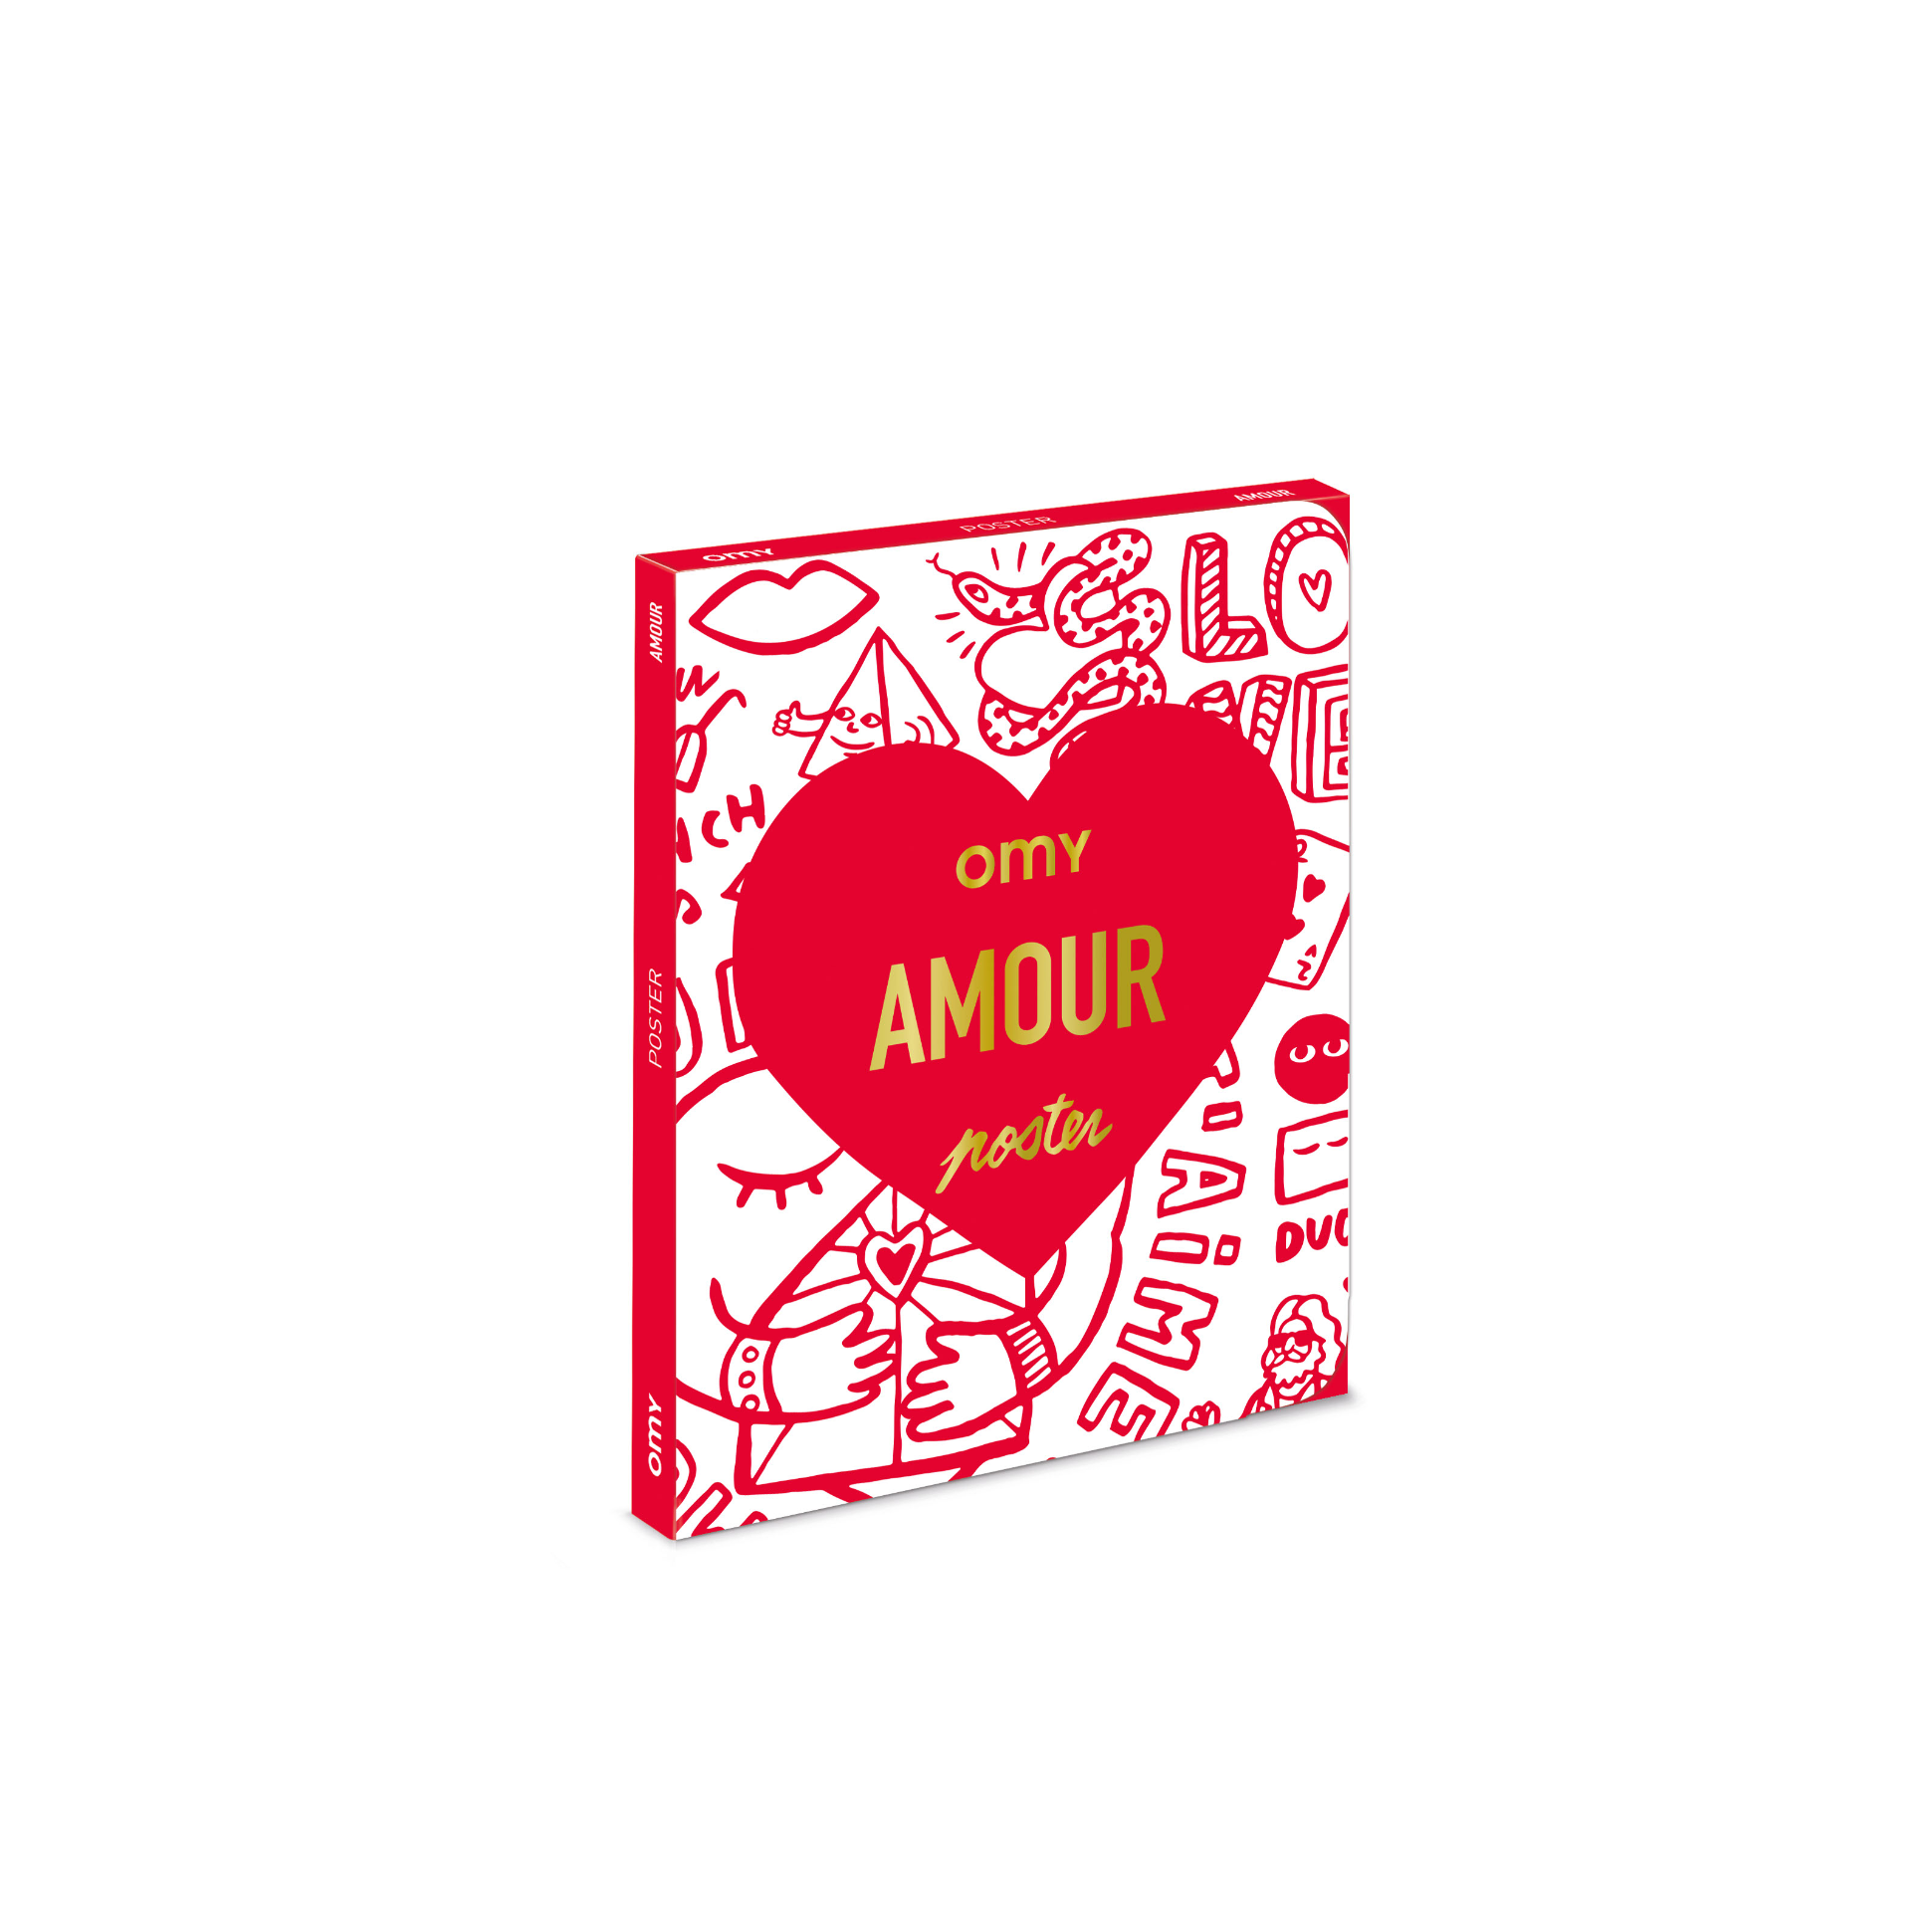 Amour [REMISE OUTLET] - Poster